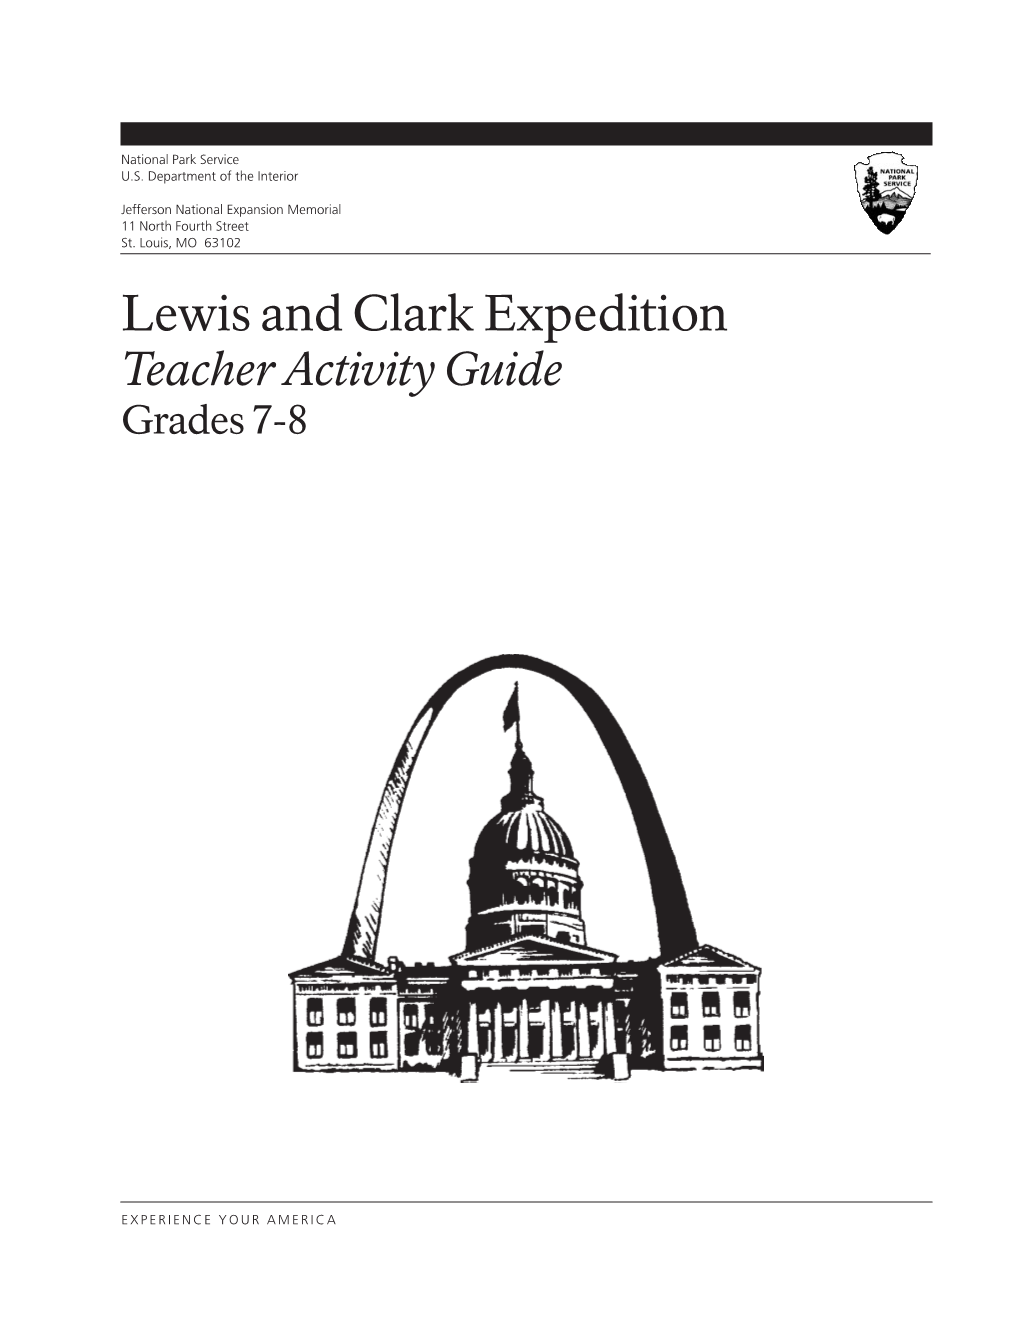 Lewis and Clark Expedition Teacher Activity Guide Grades 7-8